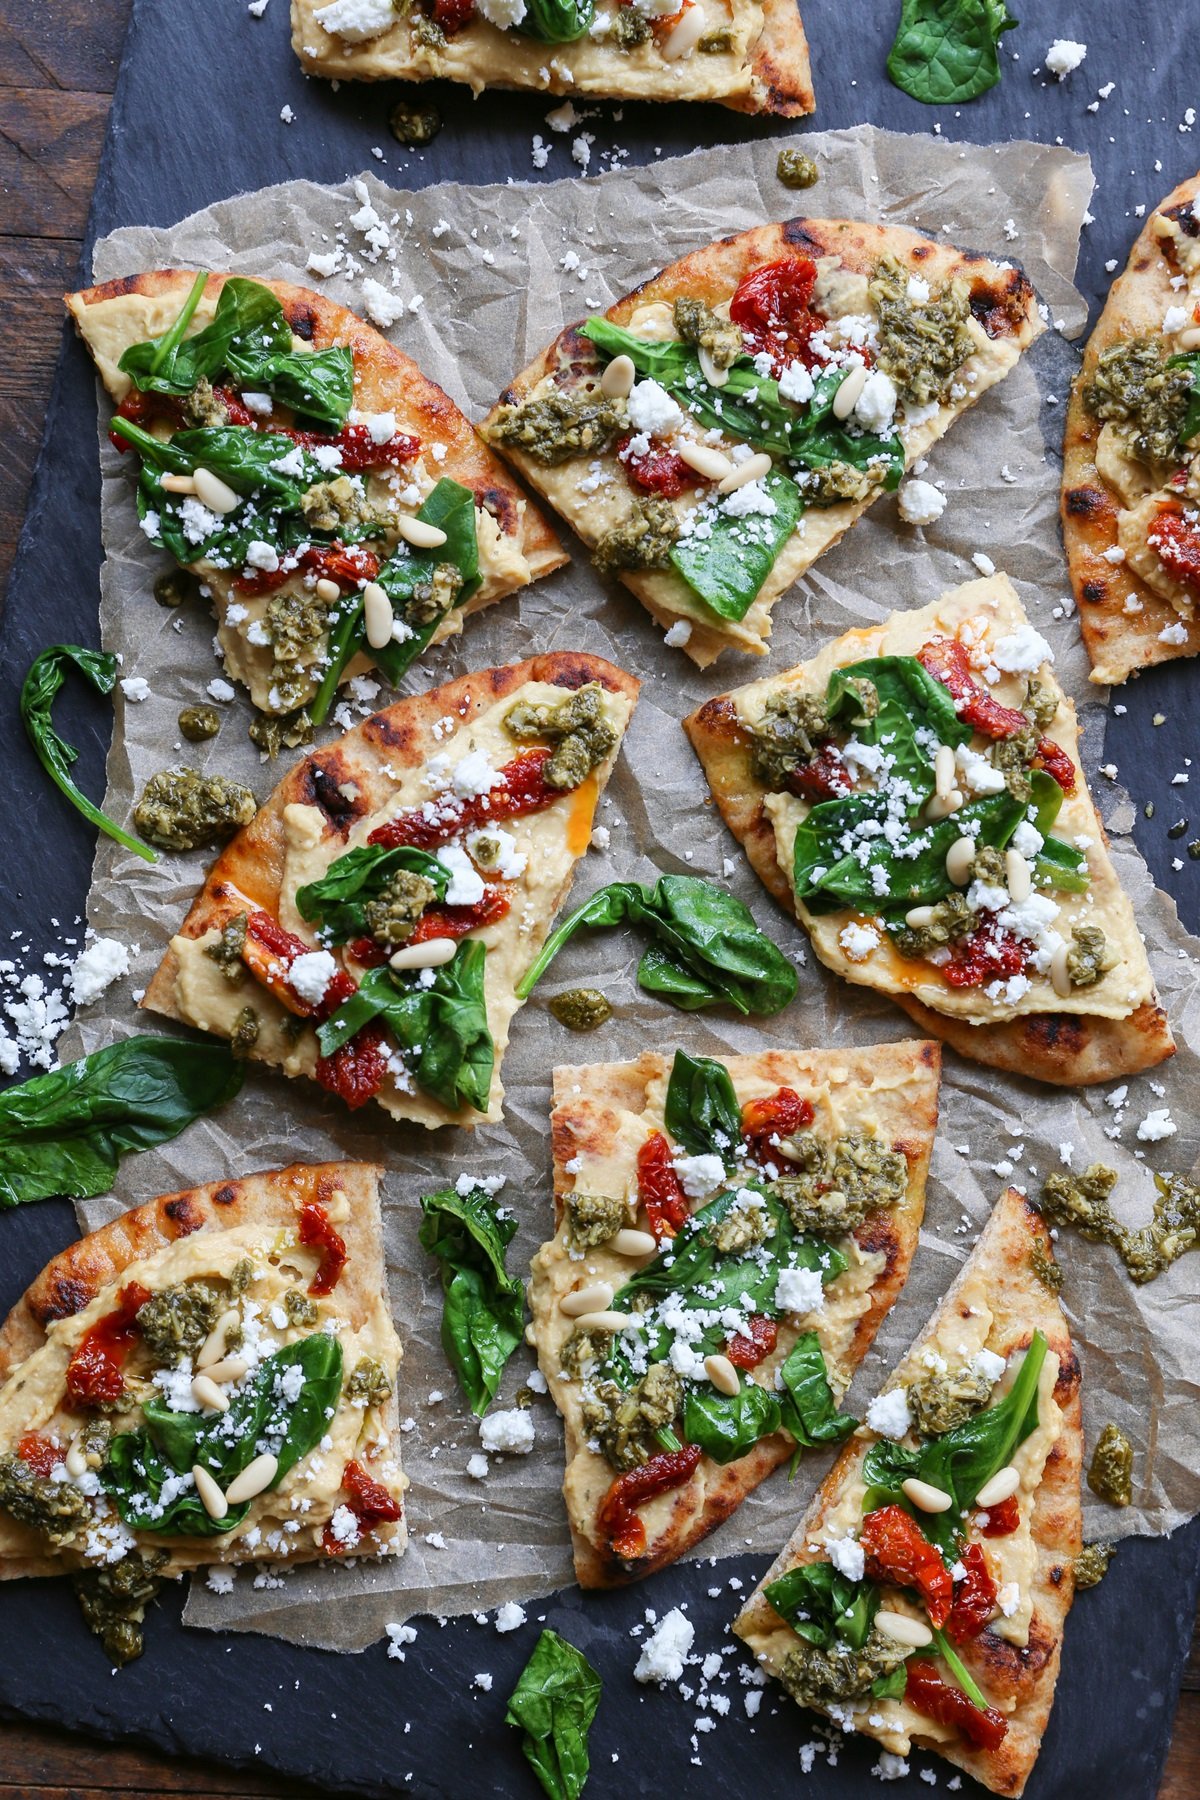 Black slate with slices of hummus flatbread on top, topped with sun-dried tomatoes, pesto sauce, spinach, and more.